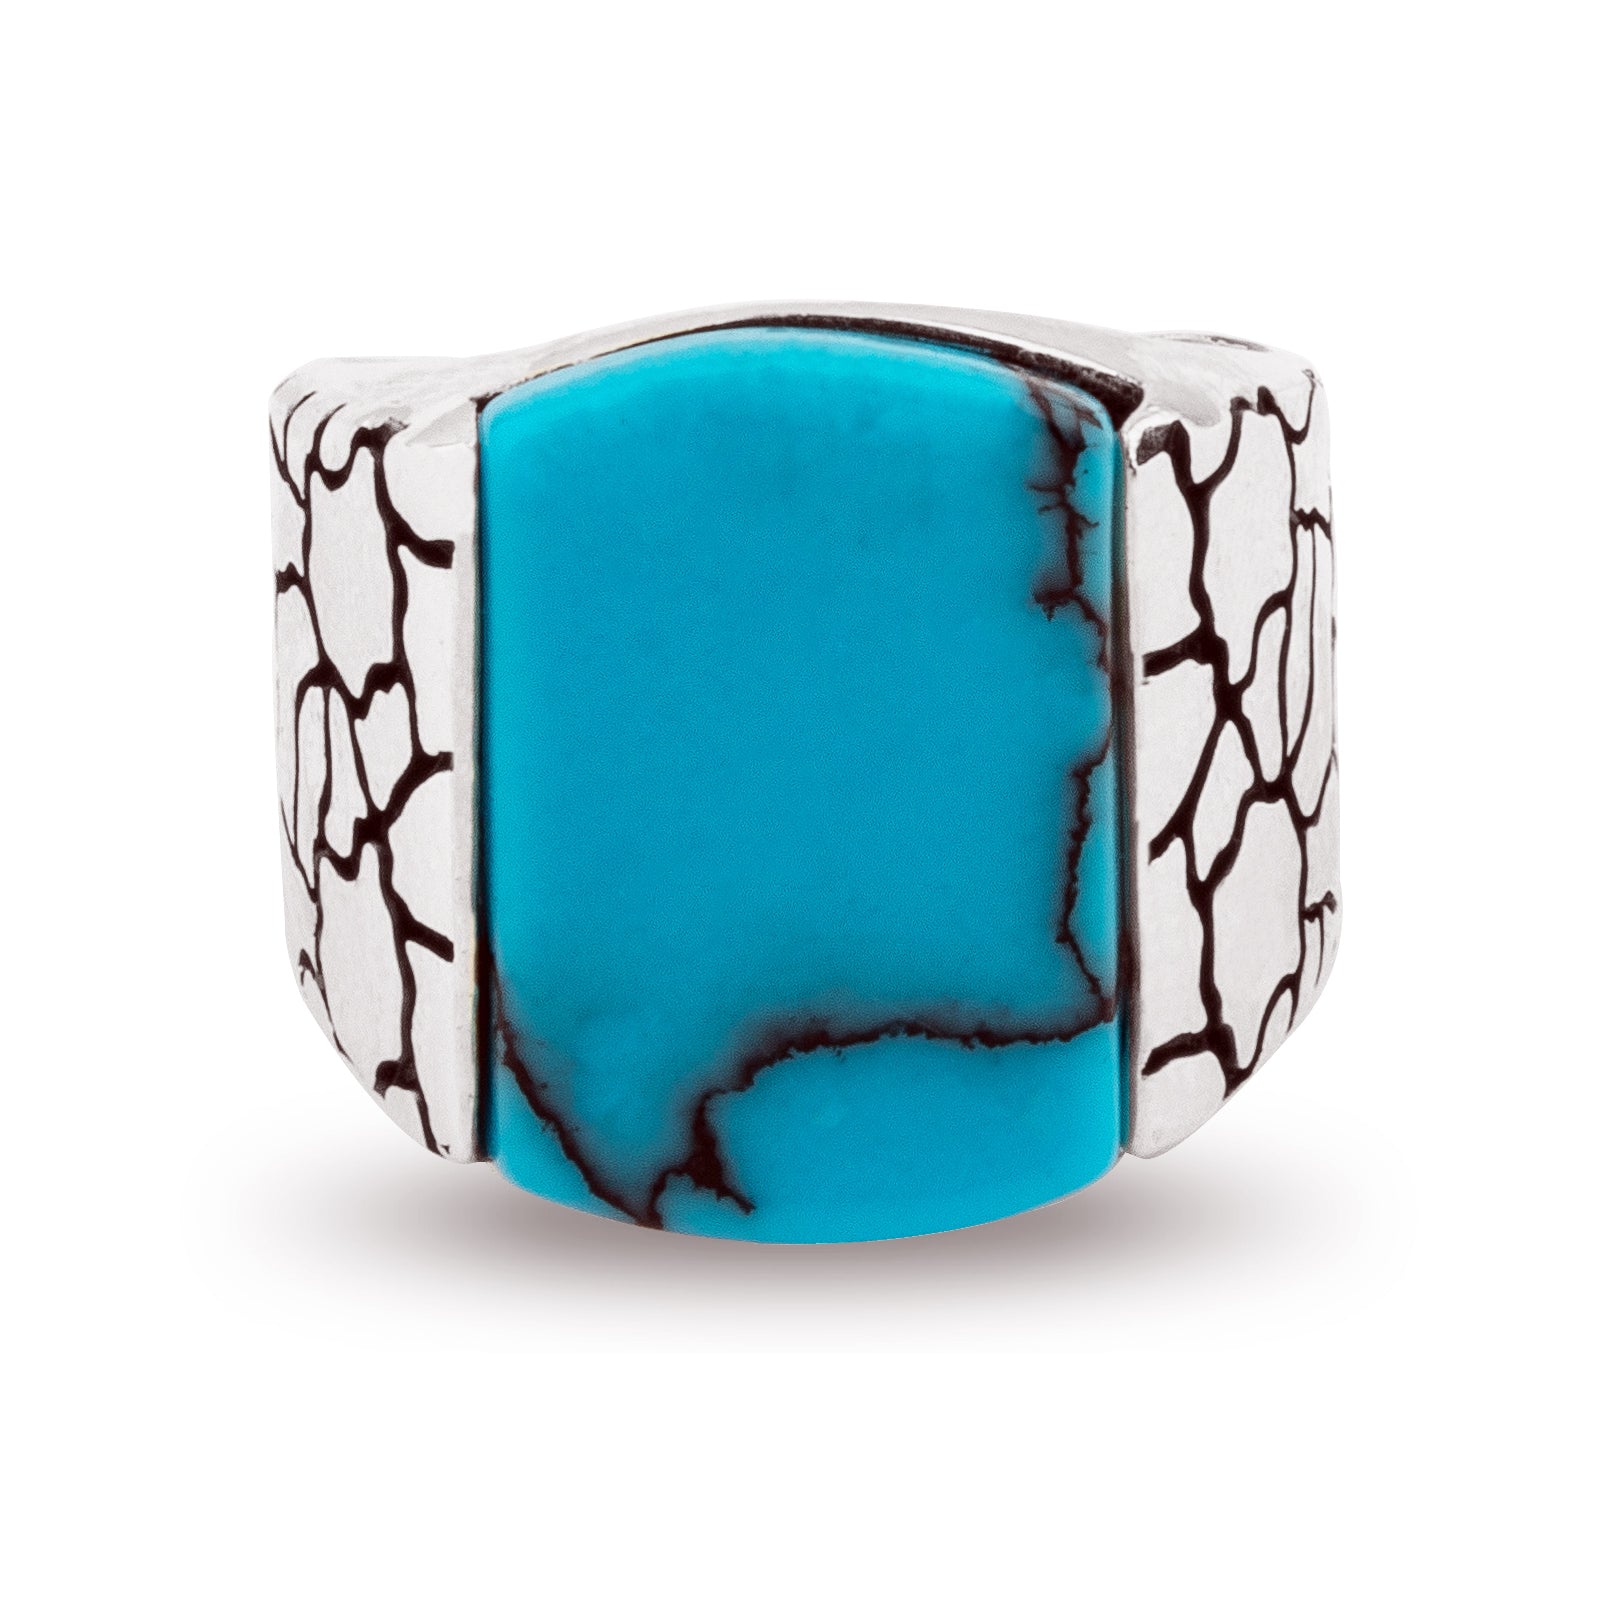 AROTOROM Turquoise Ring for Men in 925 Sterling Silver Oval Sky Blue Stone  Ring Turkish Handmade Jewelry (Size 8)|Amazon.com